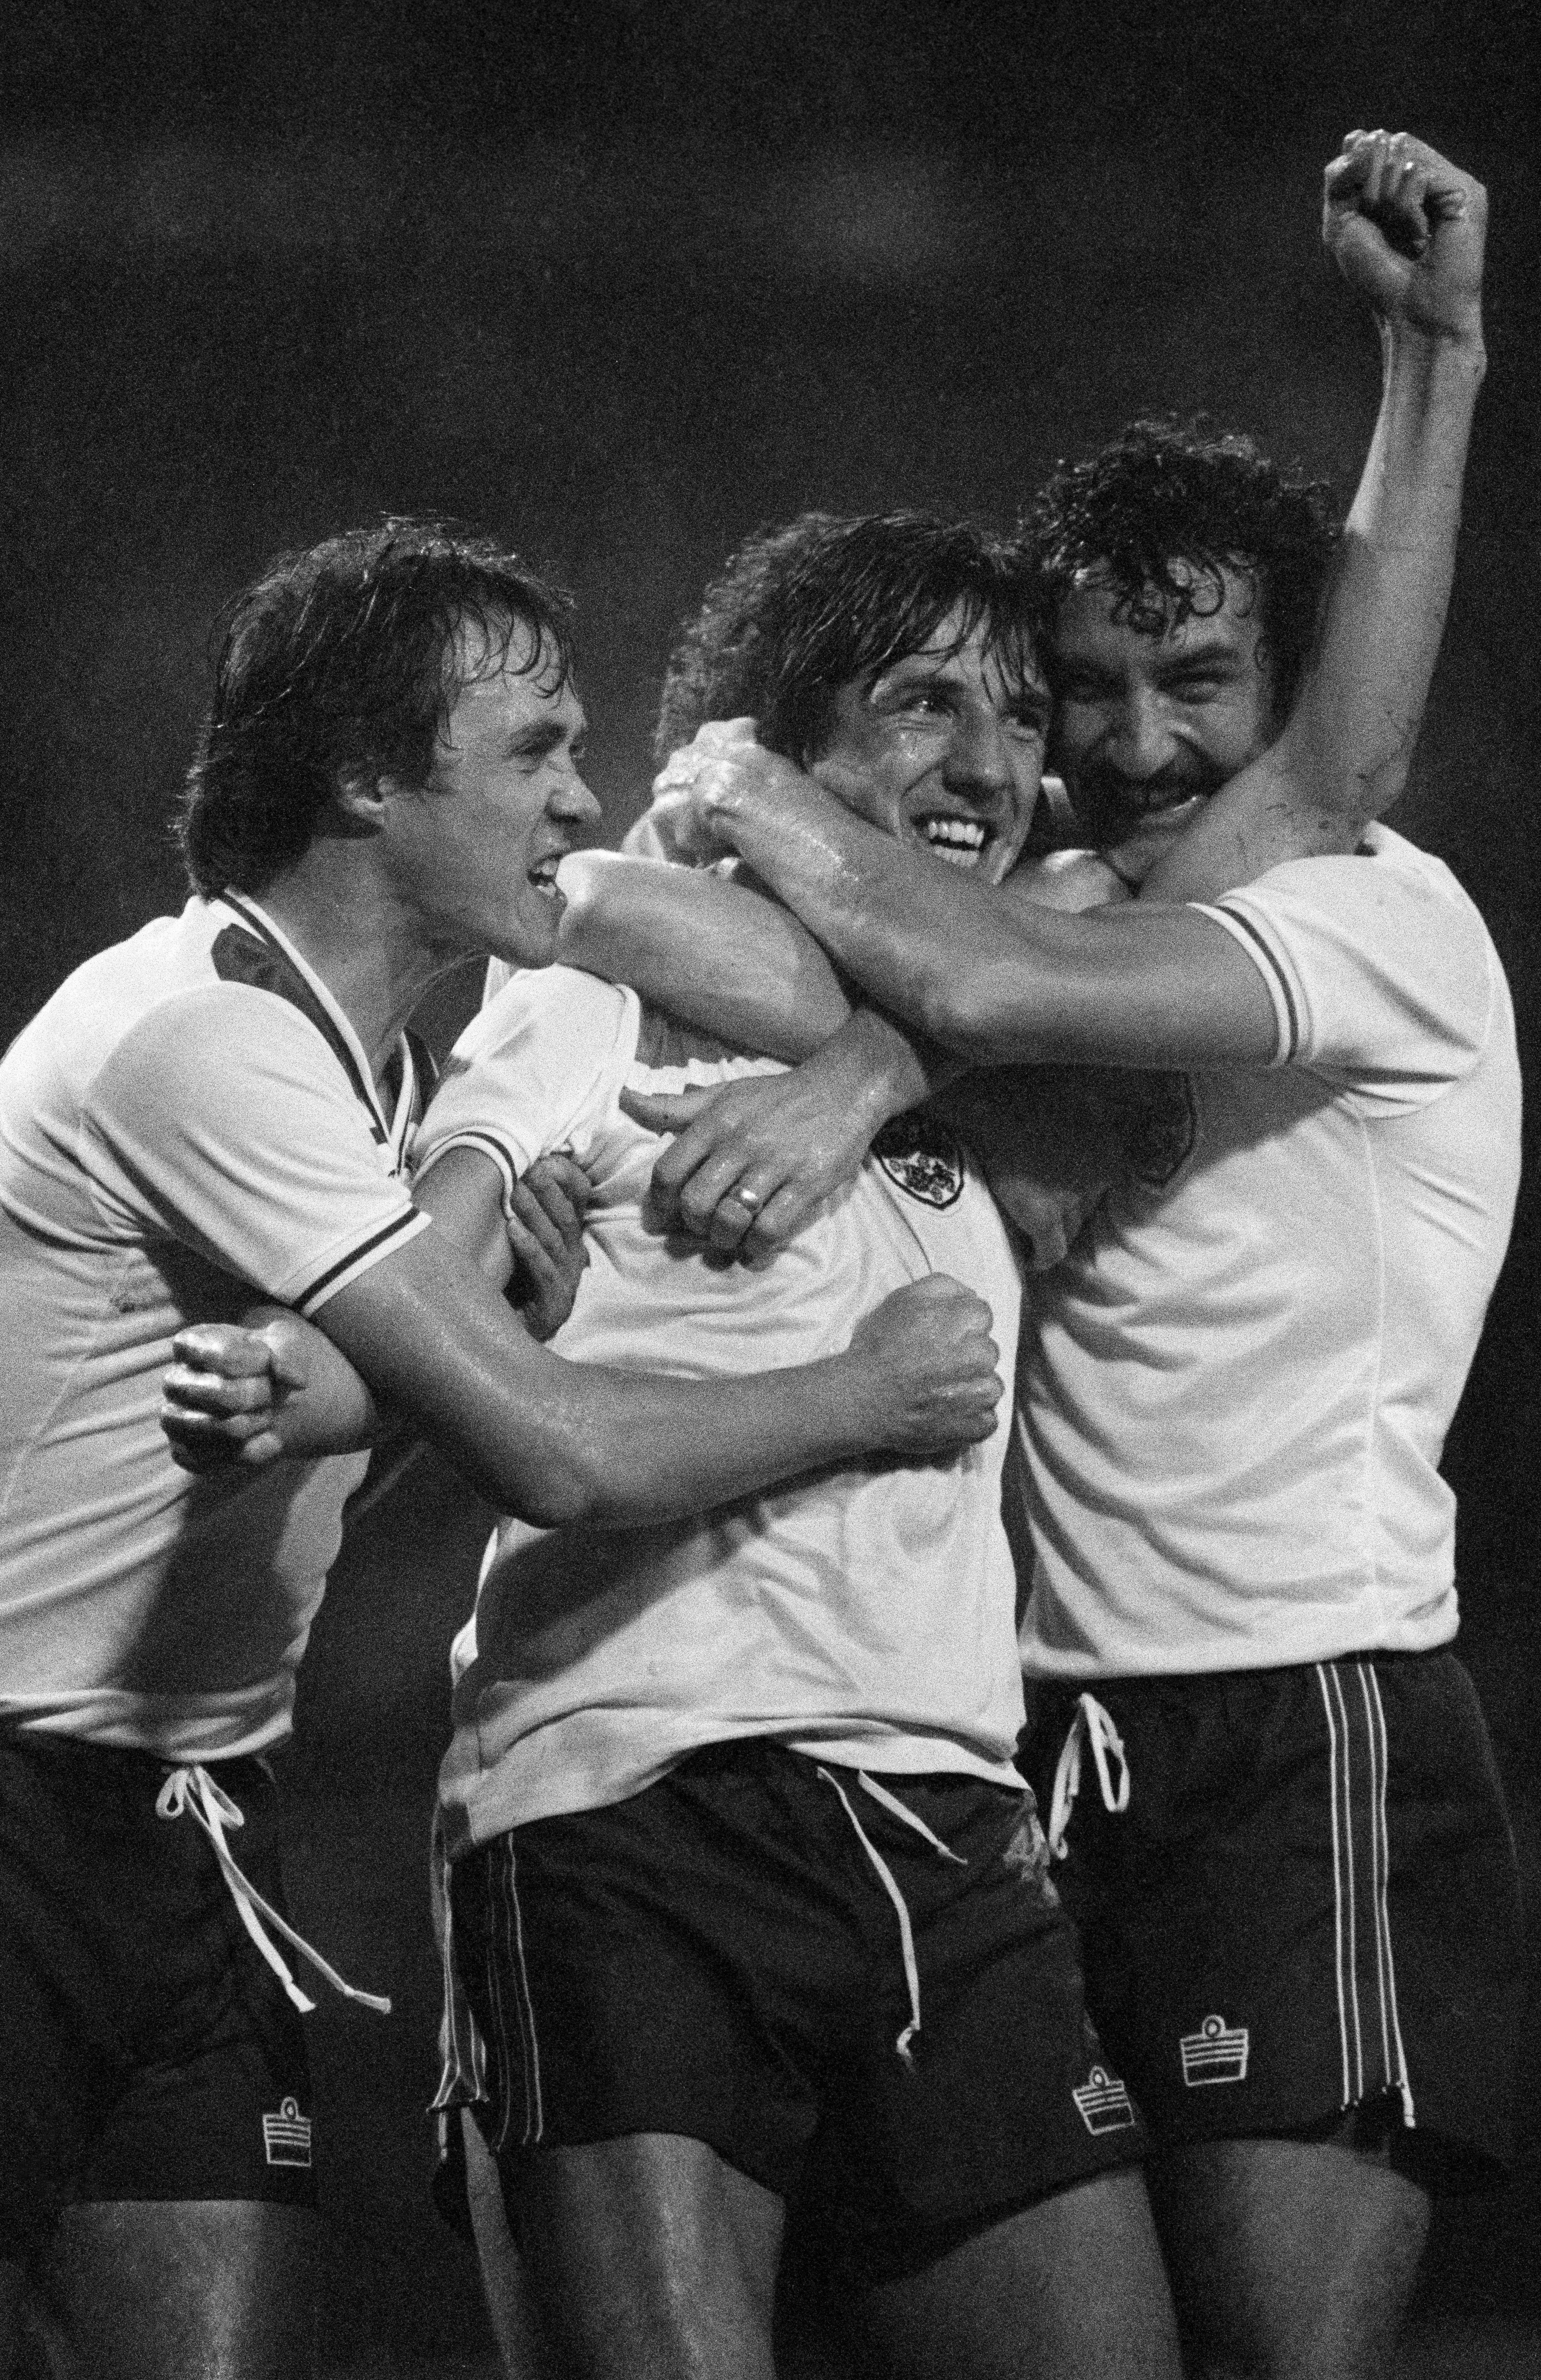 Mariner (centre) celebrates with Phil Neal and Terry McDermott after scoring England’s winner against Hungary during the World Cup qualifier at Wembley in November 1981